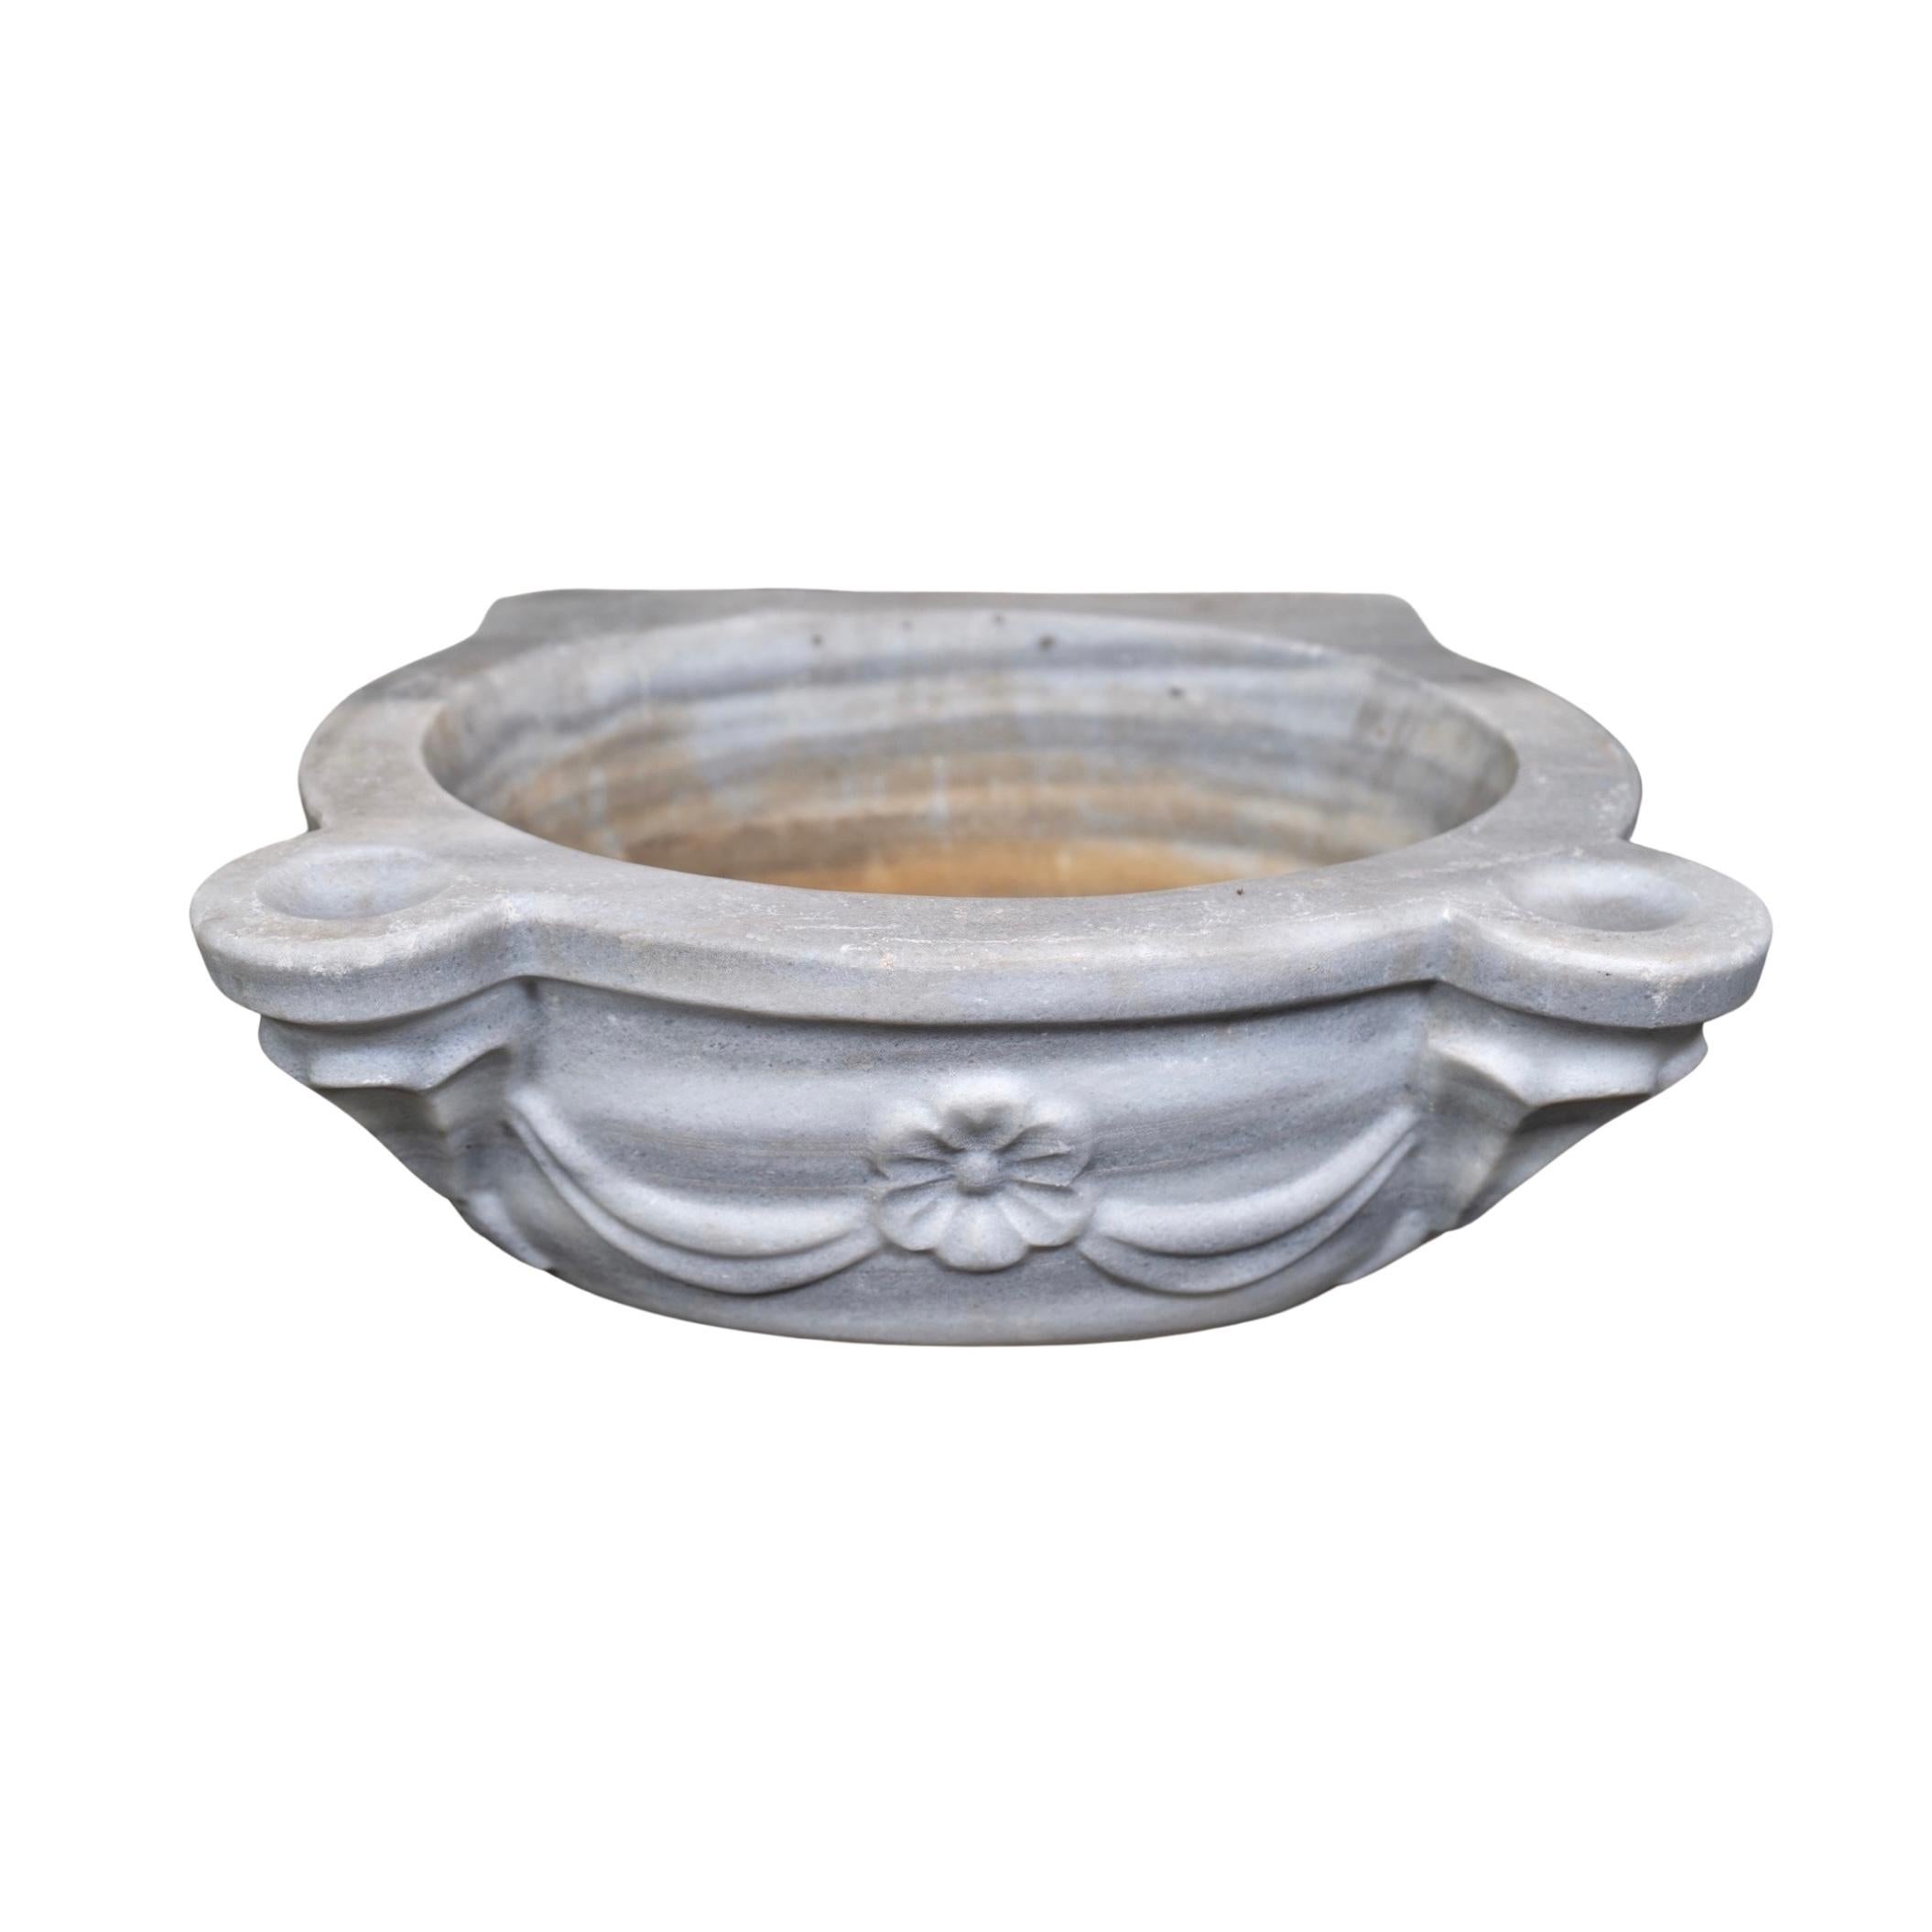 This premium French white marble sink is crafted from 18th century techniques, offering a timeless and refined aesthetic to any setting. Its unique composition remains durable and refracts light in beautiful ways. Its luxurious look and solid